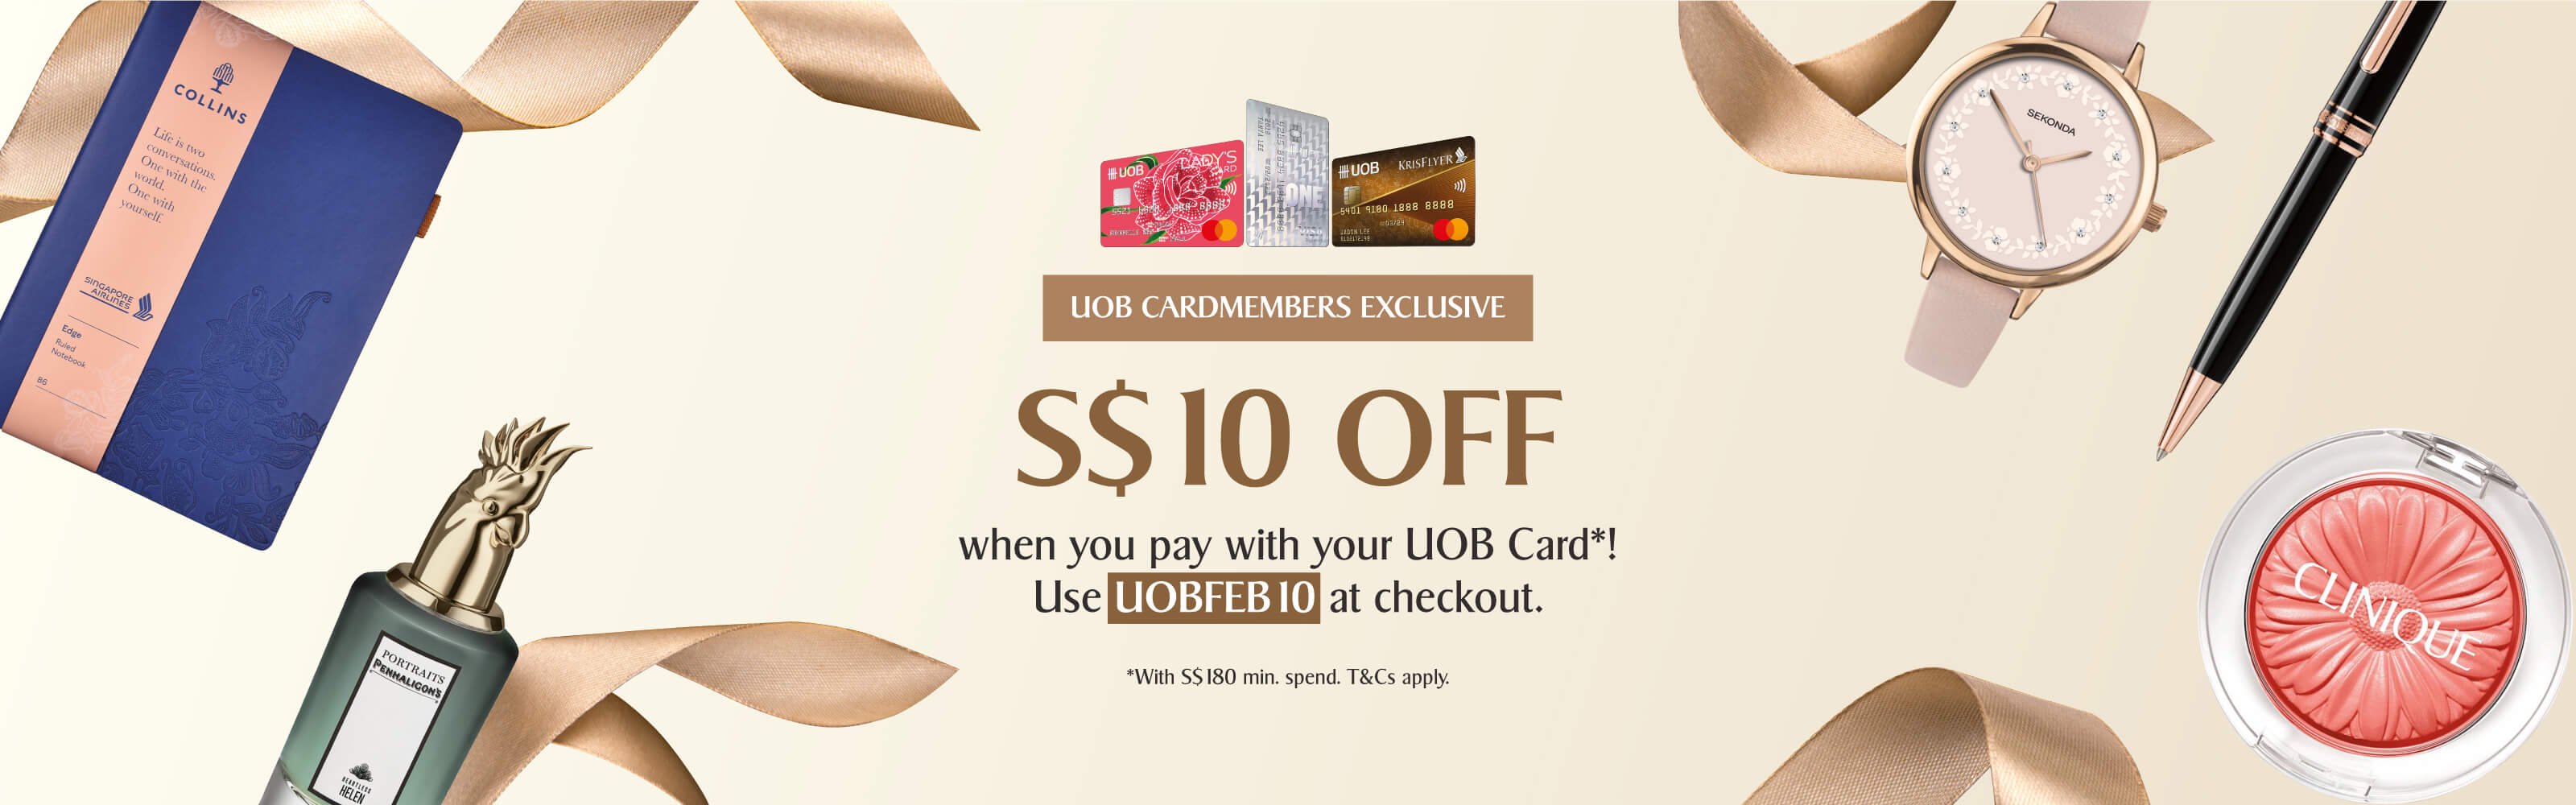 UOB Cardmembers February Promotion